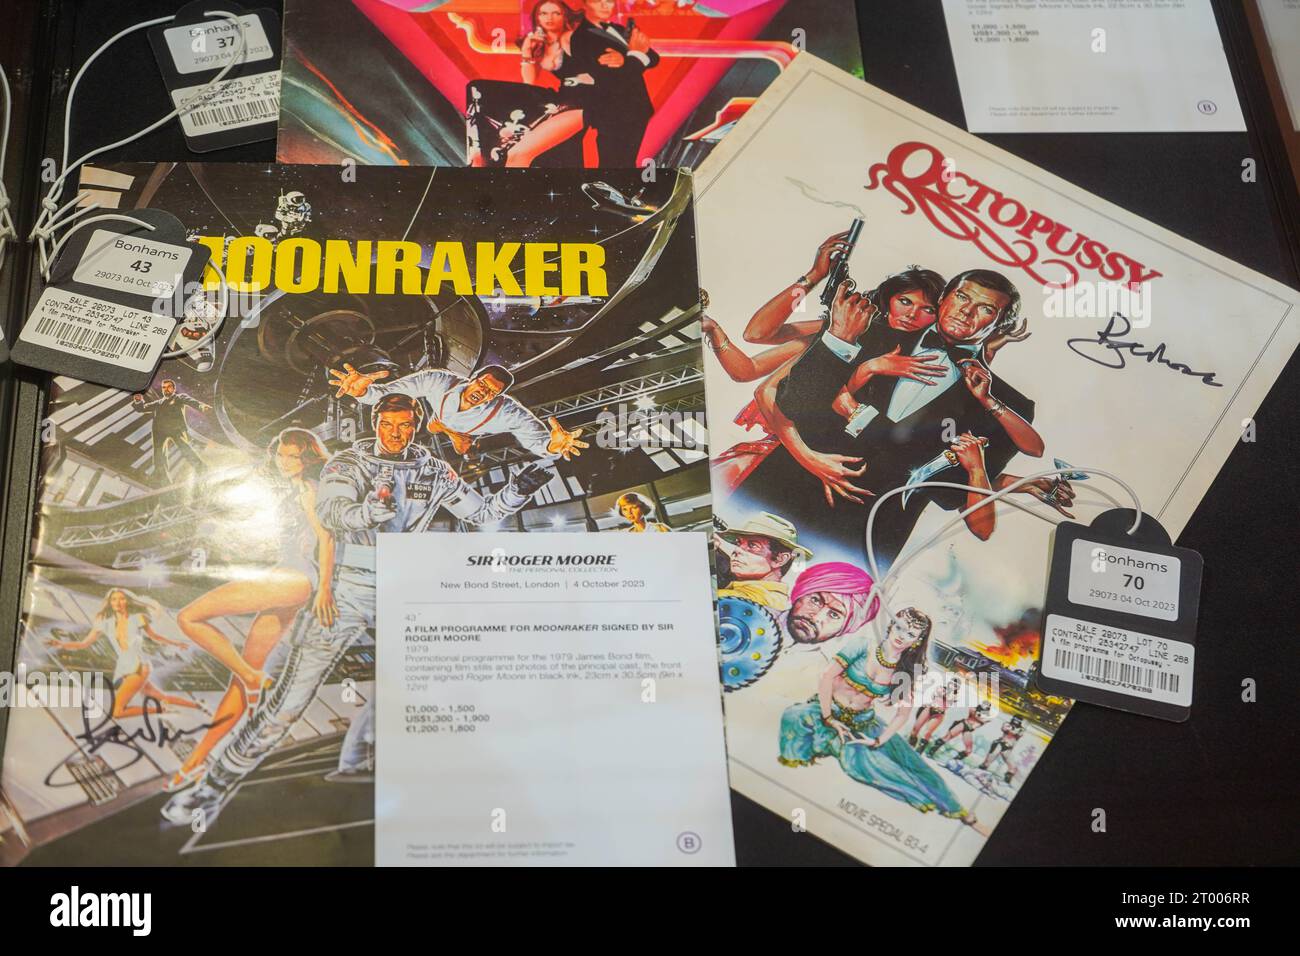 A film programme for Moonraker and Octopussy signed by Sir Roger Moore Stock Photo